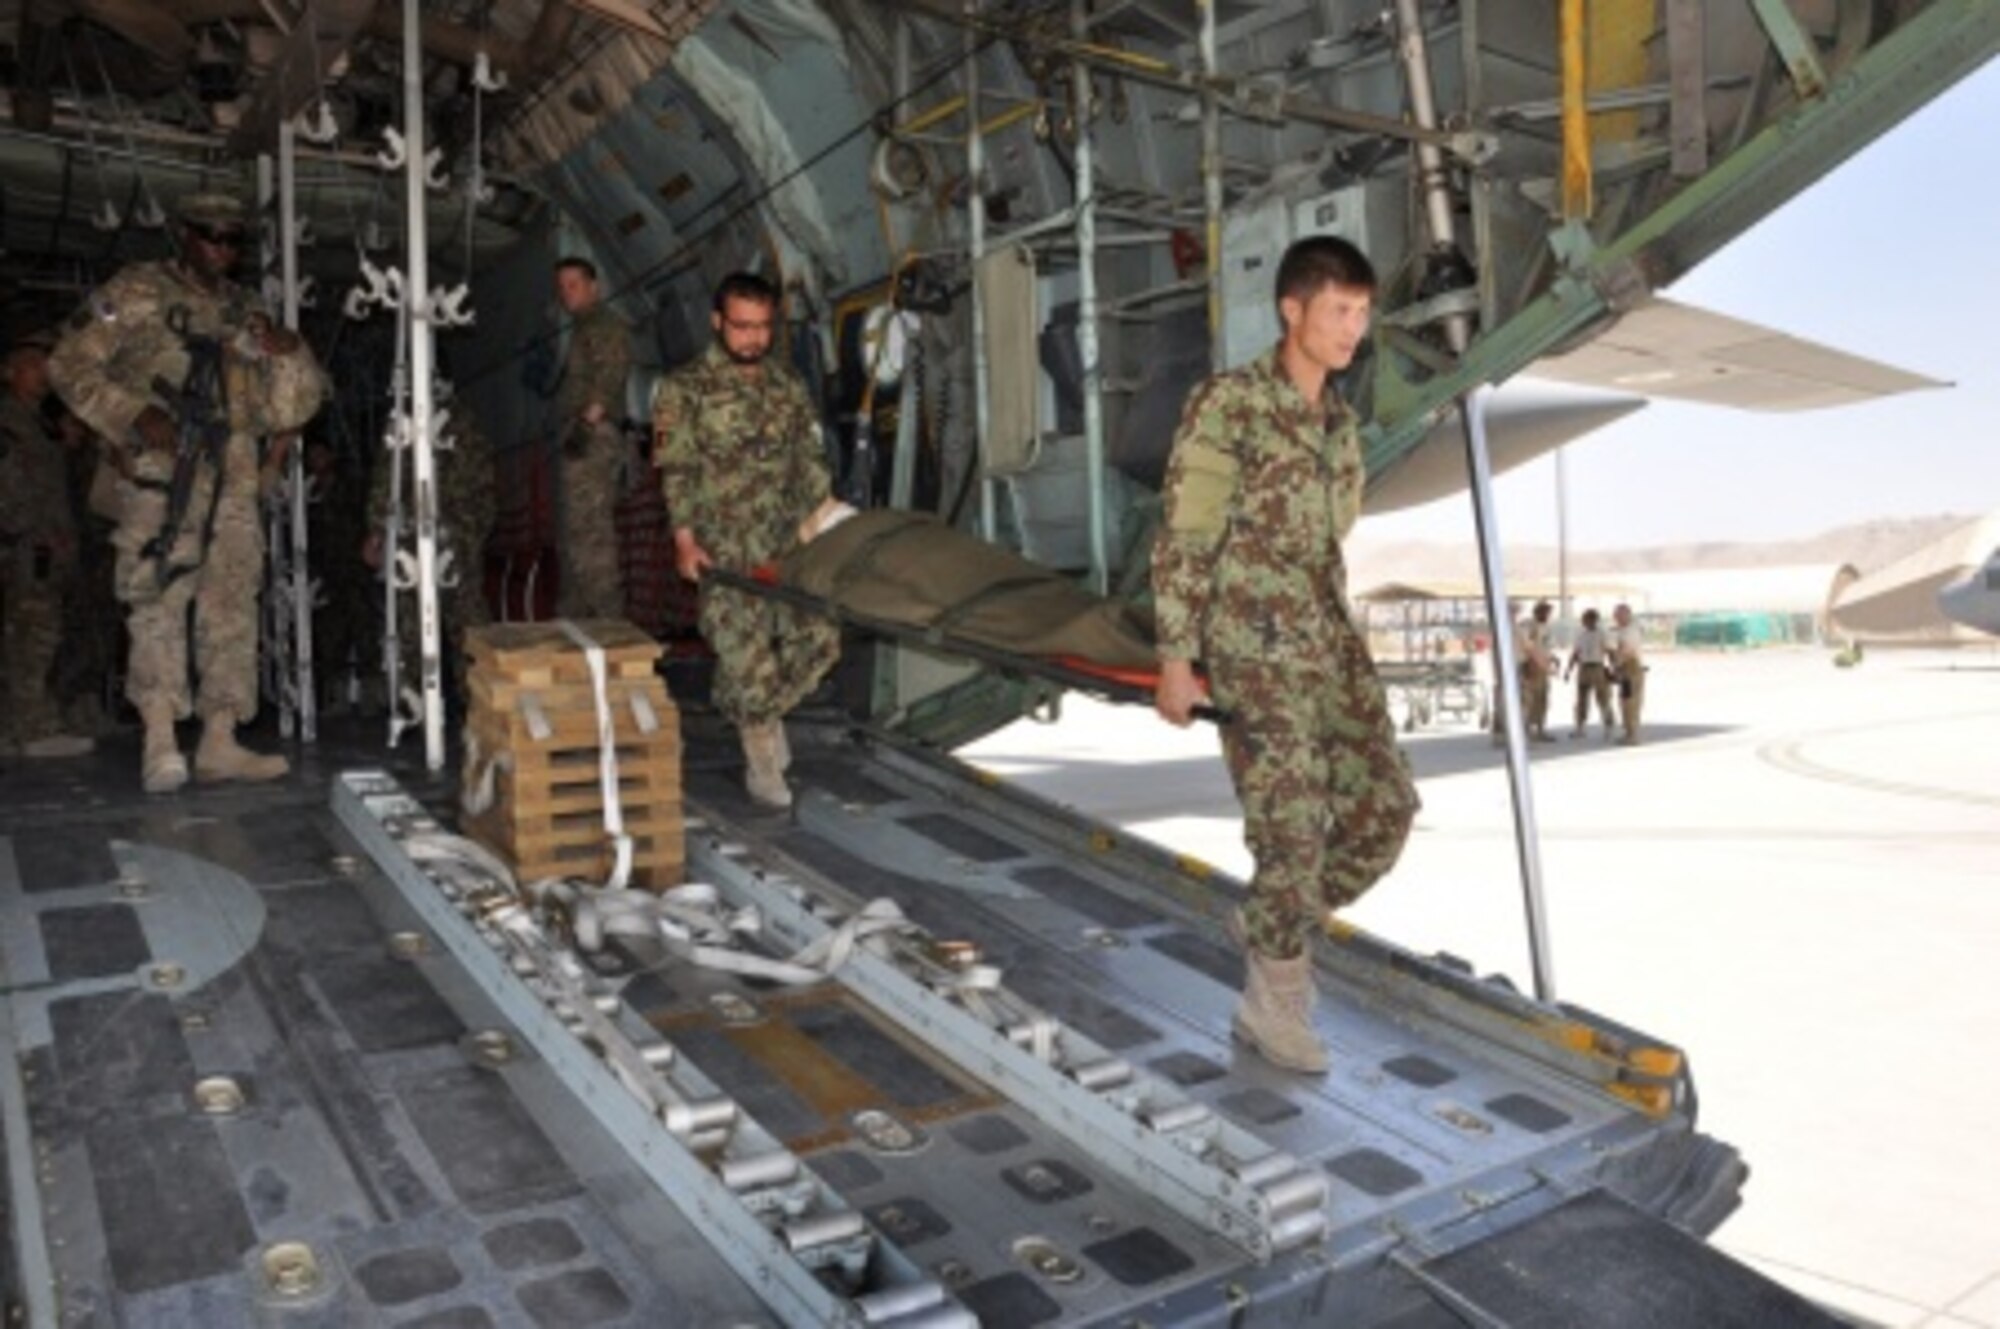 Two Afghan National Army flight medics carry a litter, or stretcher, from the back of a C-130H Hercules during a simulated medical evacuation flight at Hamid Karzai International Airport, Afghanistan, July 9, 2015. The Train, Advise, Assist Command - Air (TAAC-Air) advisors provide weekly training to the ANA and Afghan air force to further develop and grow their fight medics’ capabilities. (U.S. Air Force photo/Capt. Eydie Sakura)